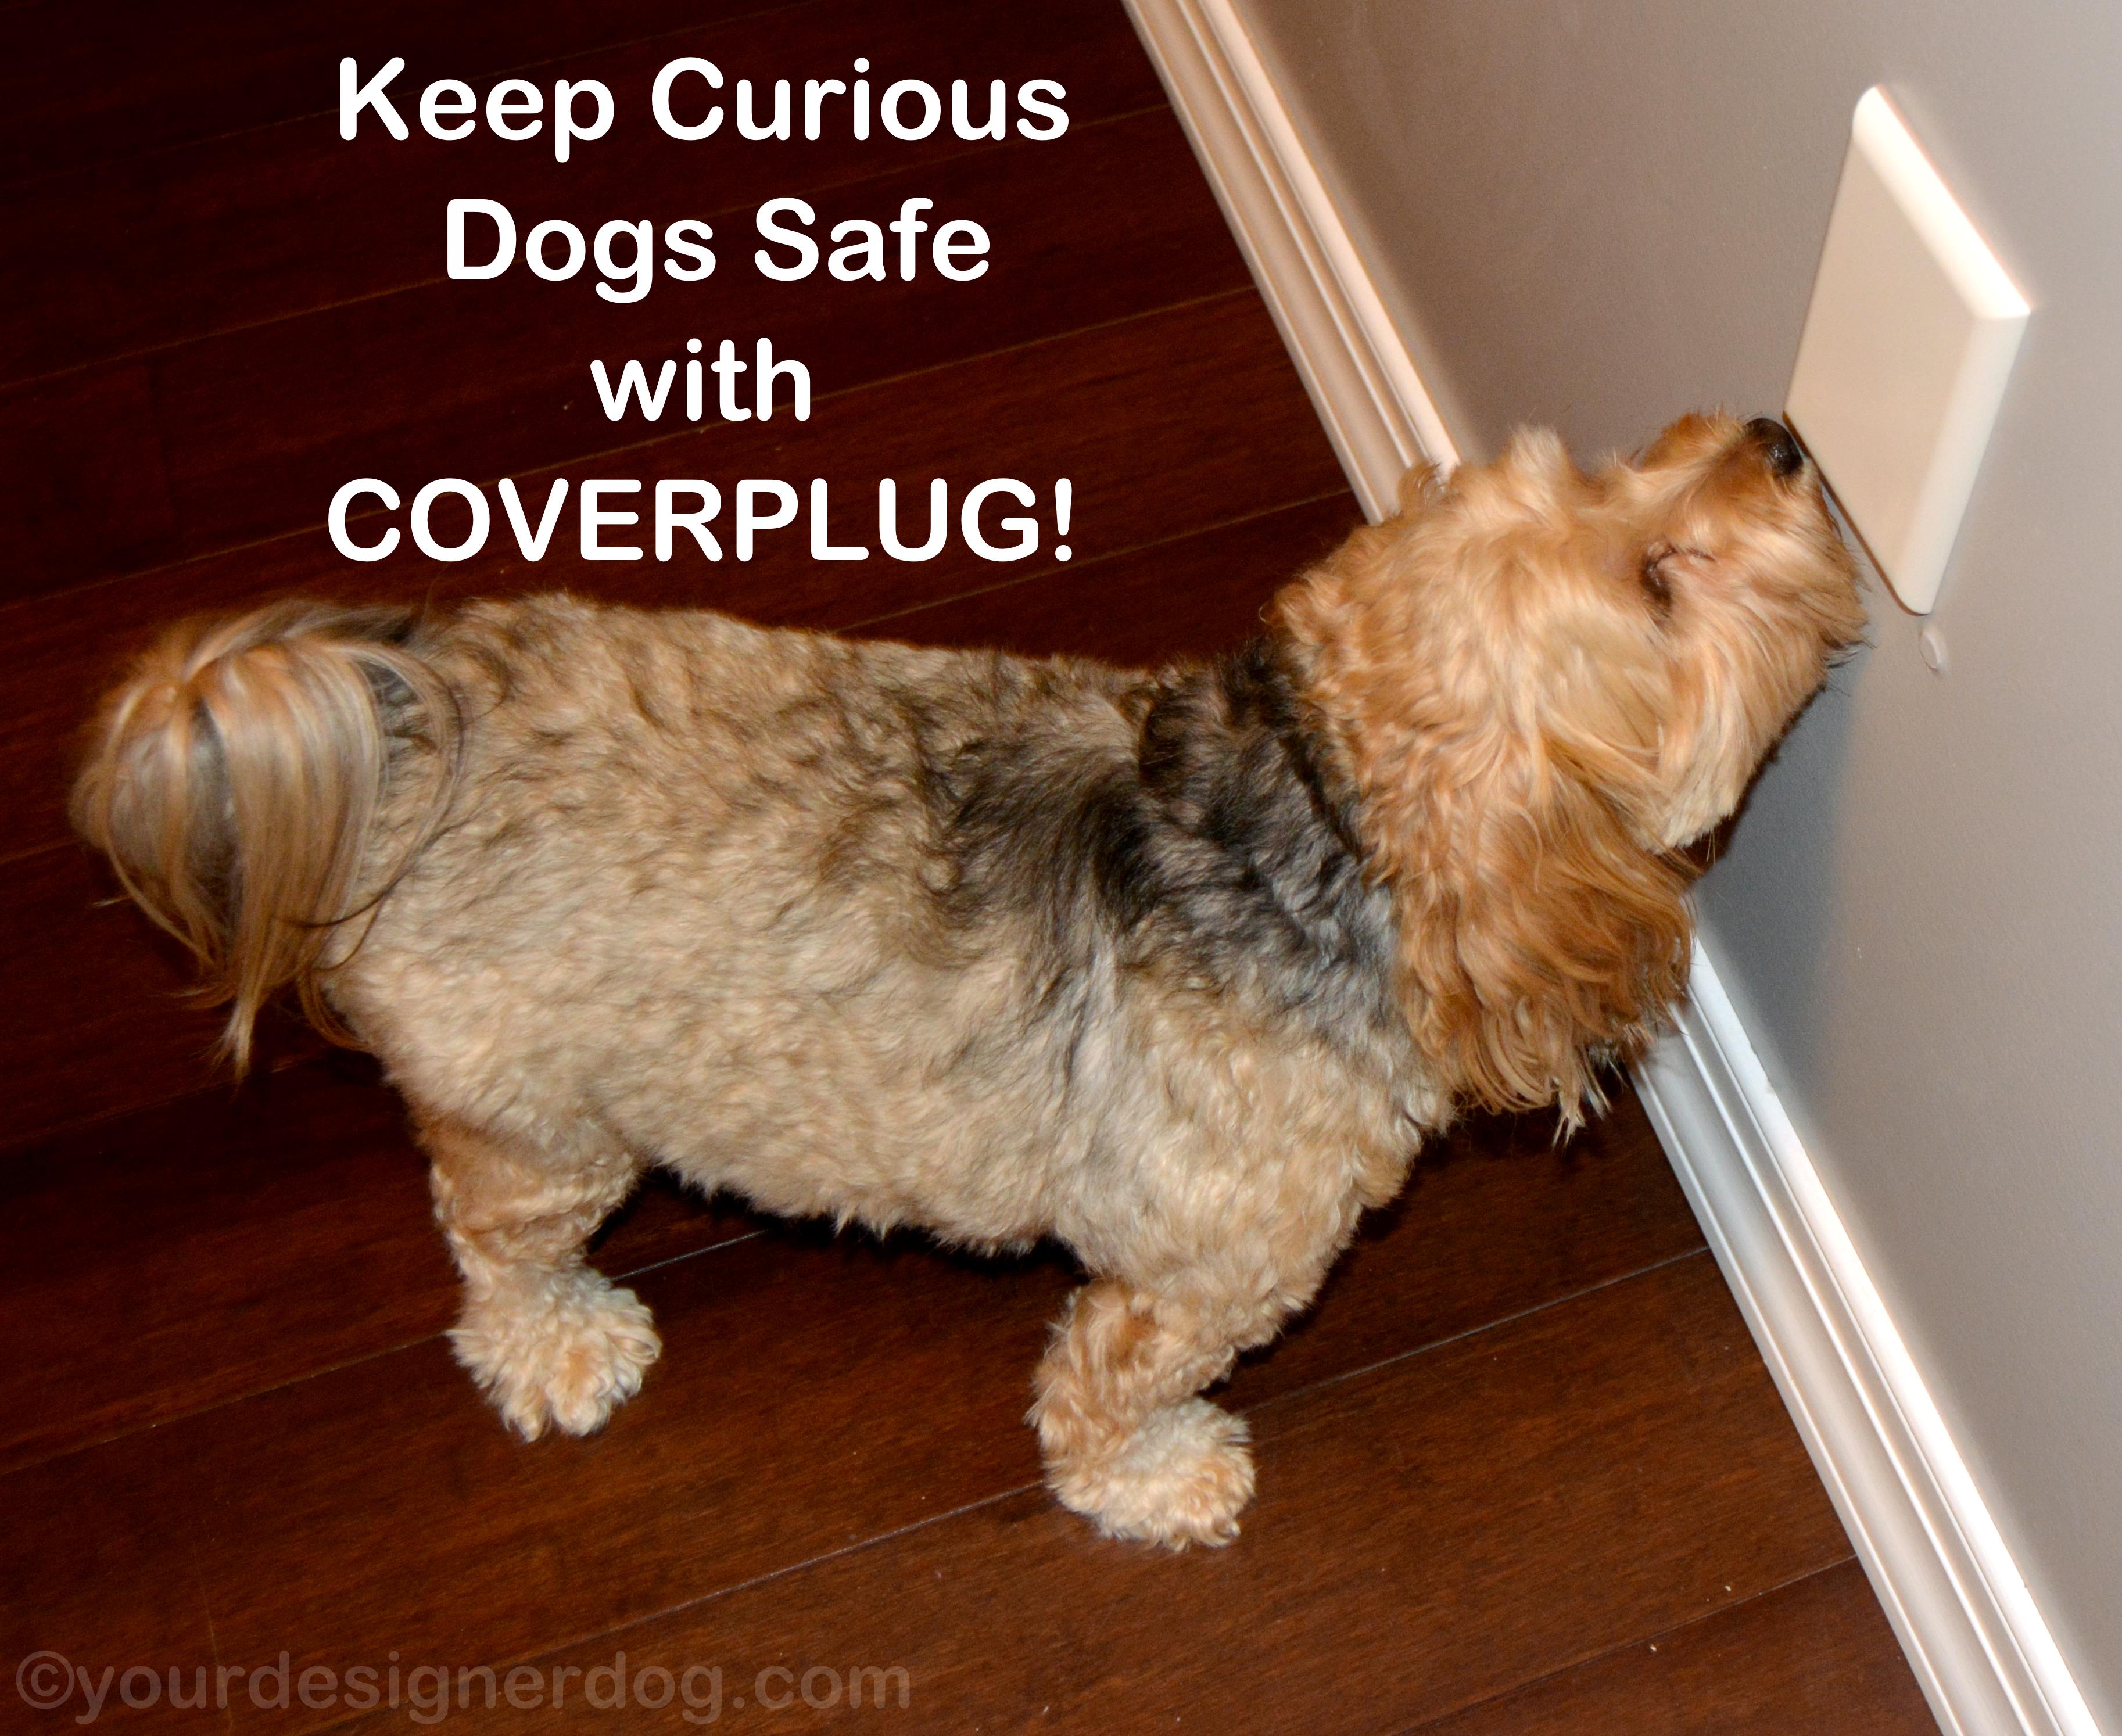 dogs, designer dogs, yorkipoo, yorkie poo, childproofing, outlet cover, coverplug